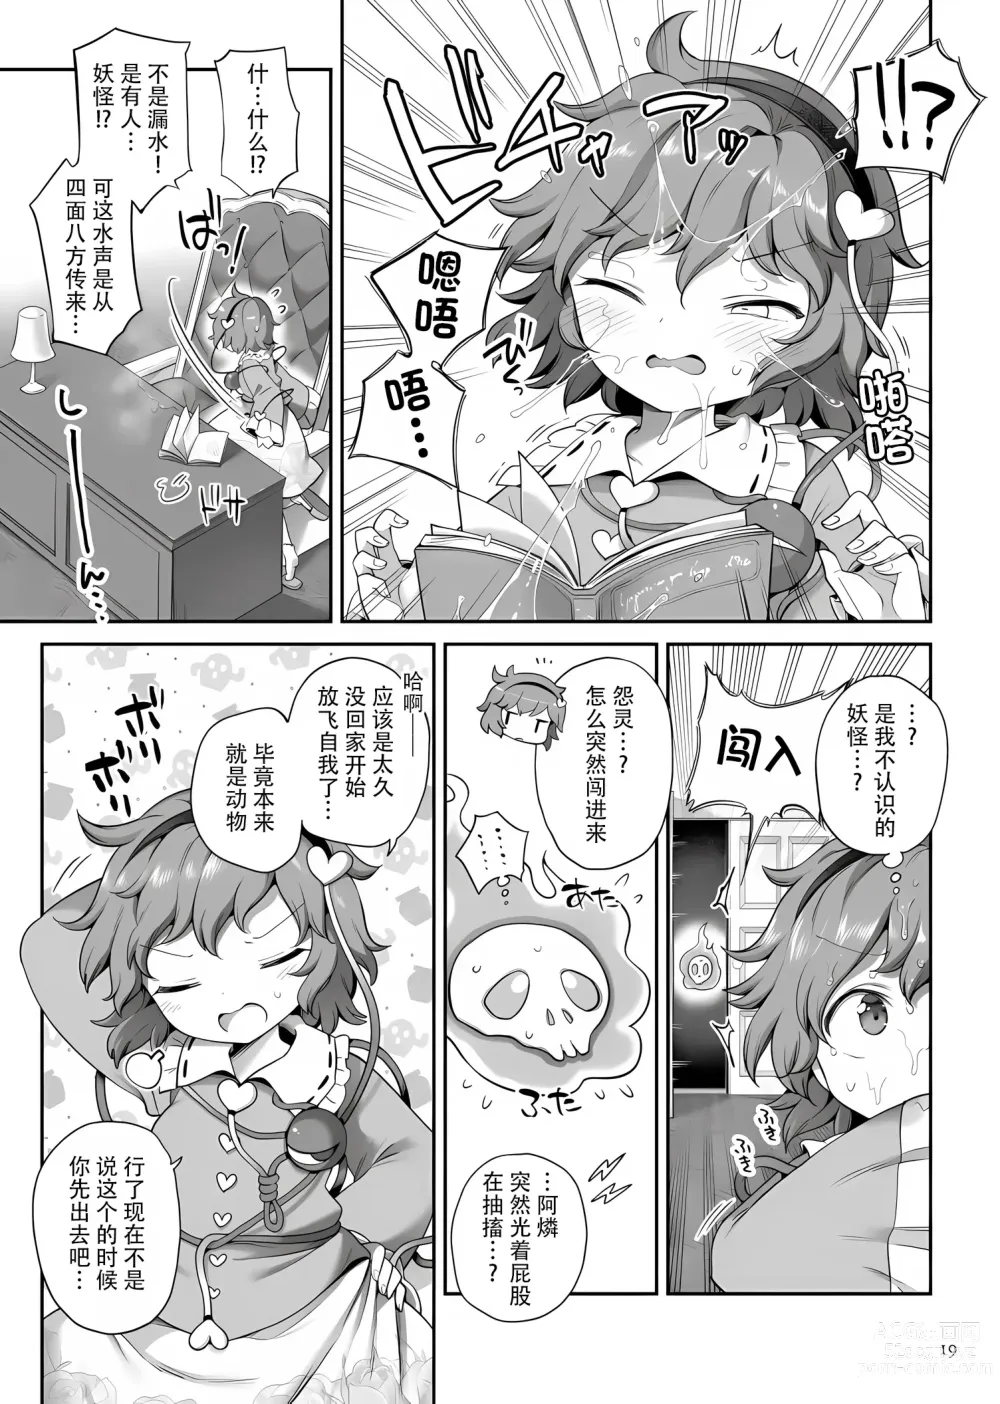 Page 19 of doujinshi [Unmei no Ikasumi (Harusame) Super Id (Touhou Project) [Chinese] [79%汉化组] [Digital]